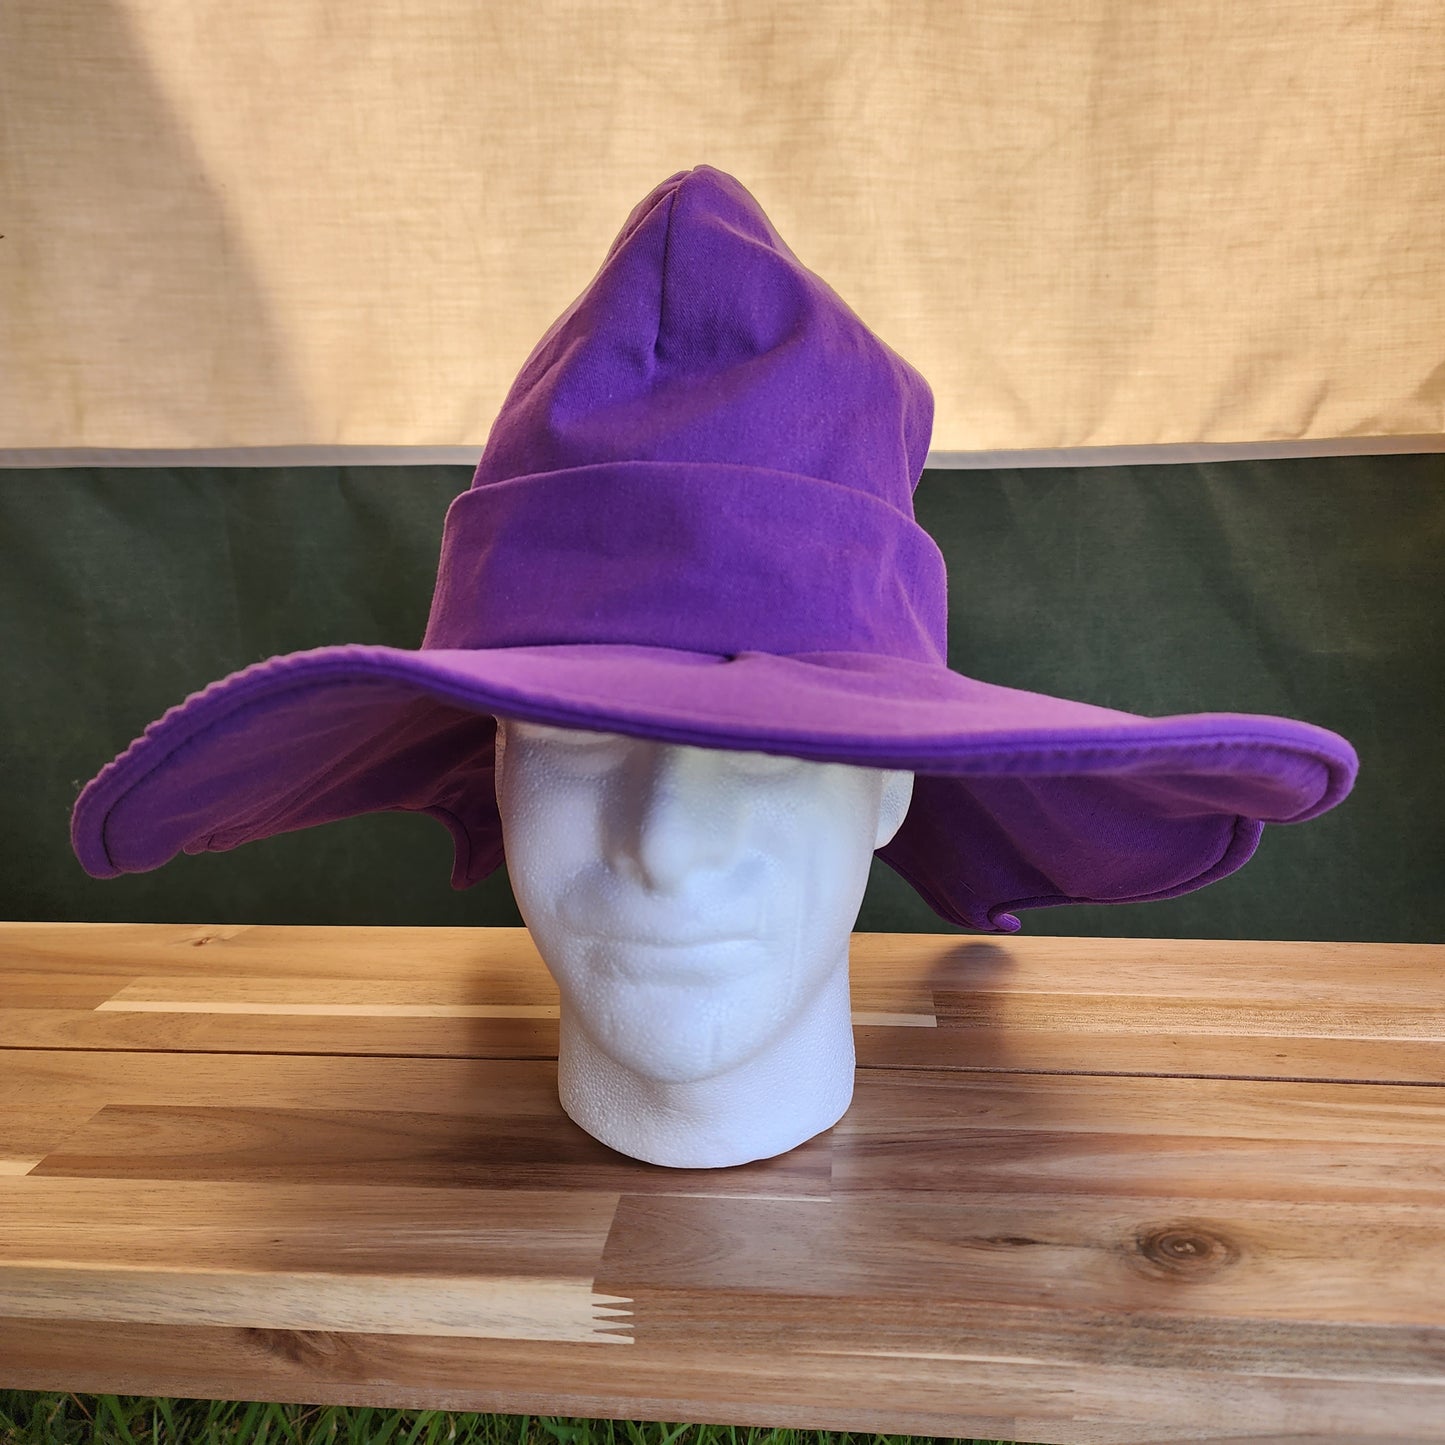 Butterfly Witch Hat- Royal Purple with Black and White Embroidery